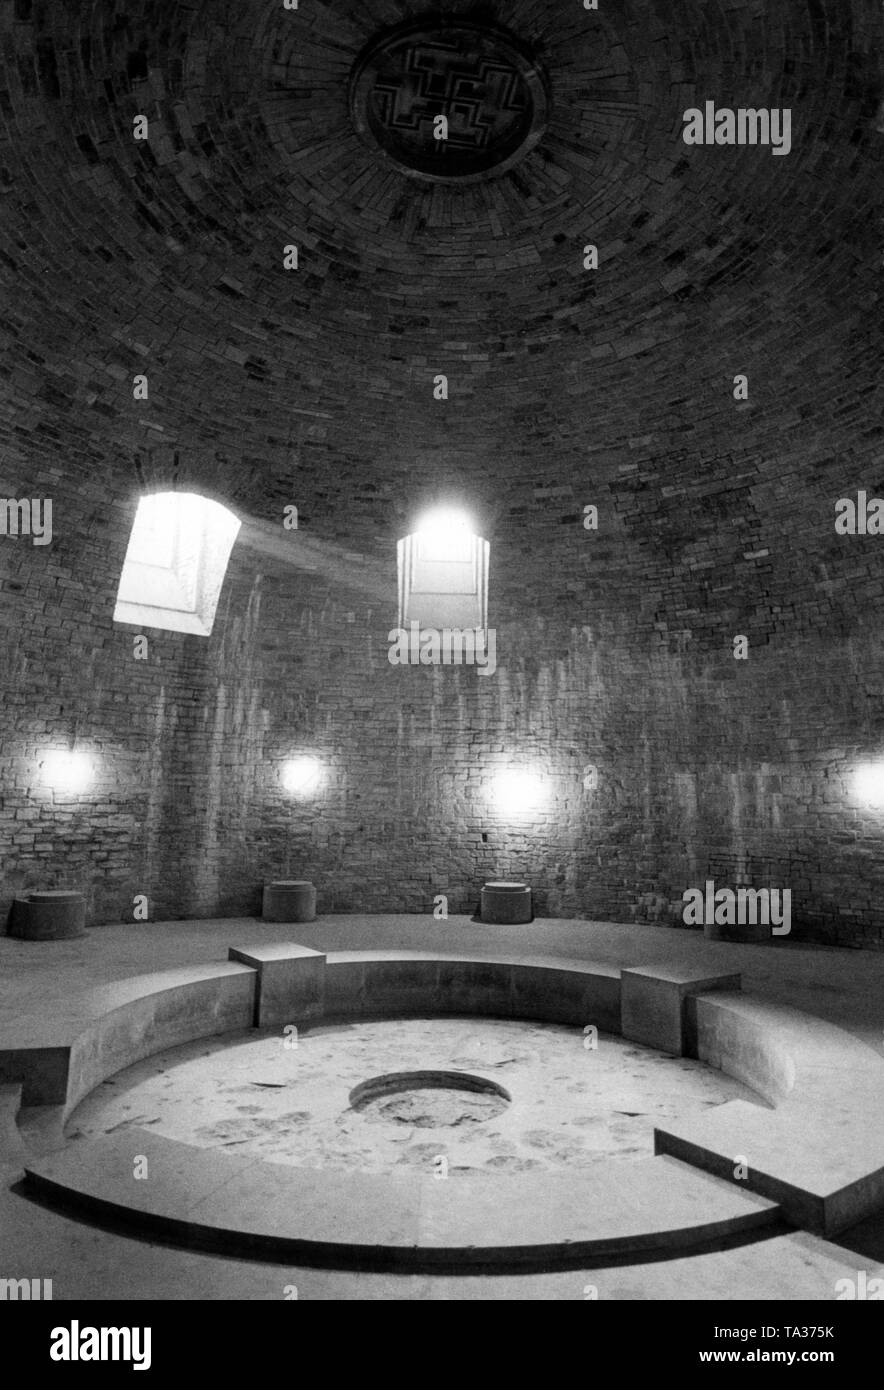 The 'Hall of the Dead' also known as the 'Valhalla' of the Wewelsburg with intrinsic swastika in the coppola. (undated picture) Stock Photo